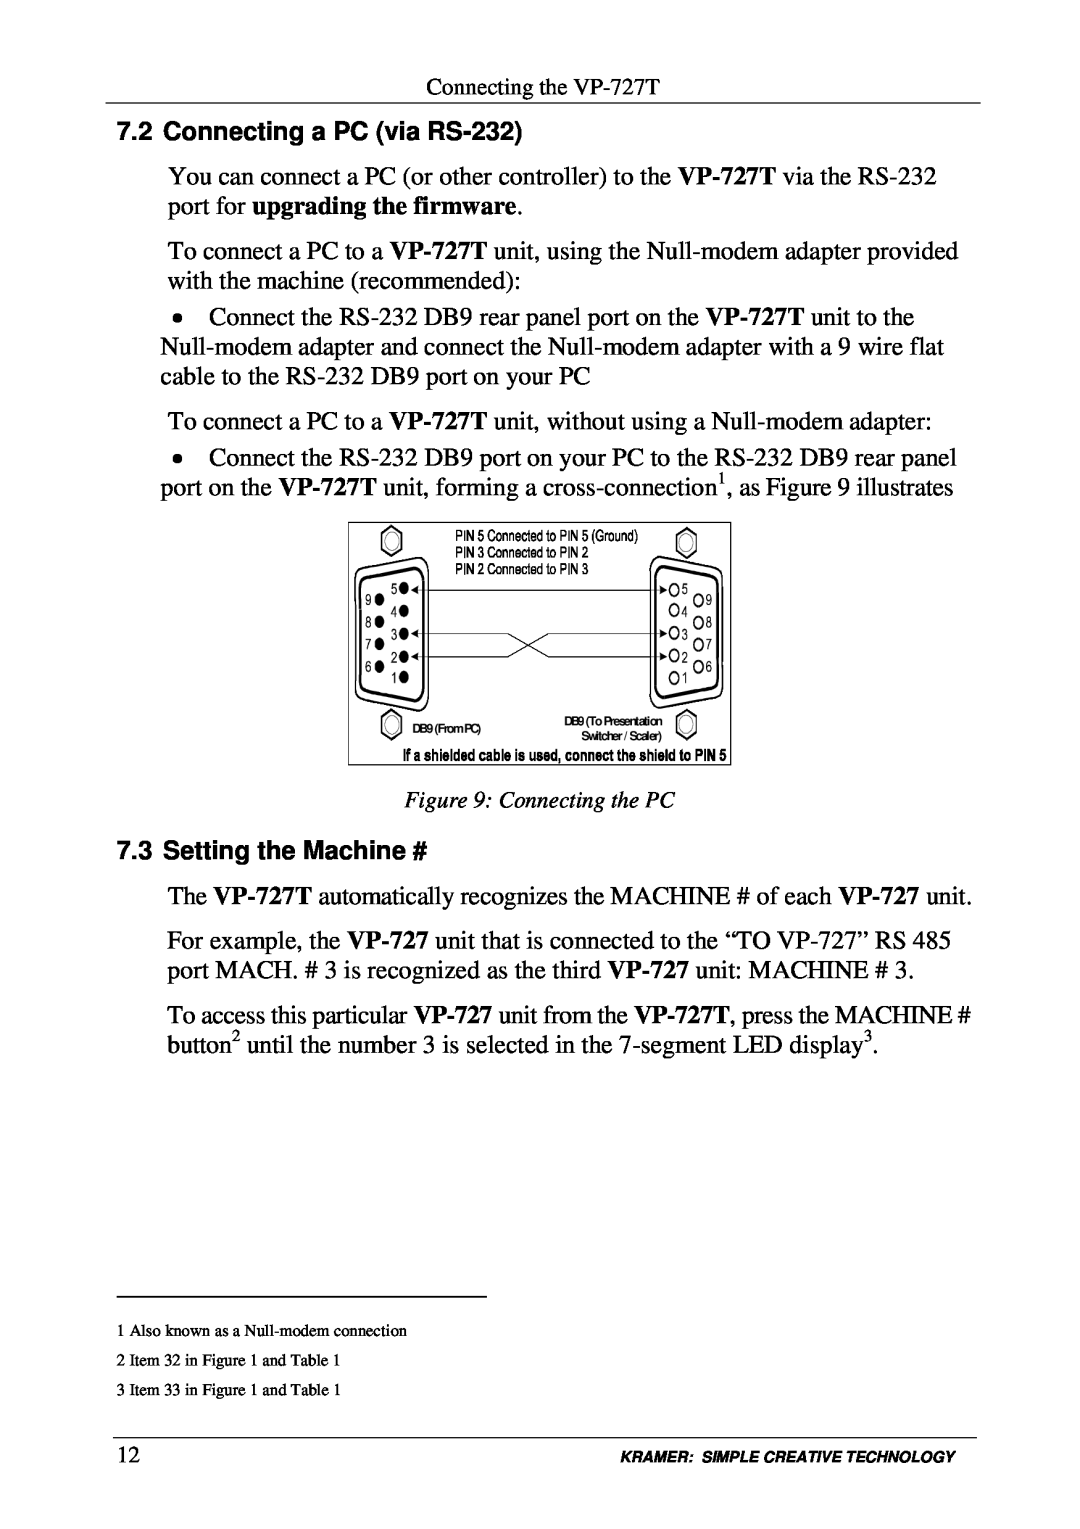 Kramer Electronics VP-727T user manual Connecting a PC via RS-232, Setting the Machine # 